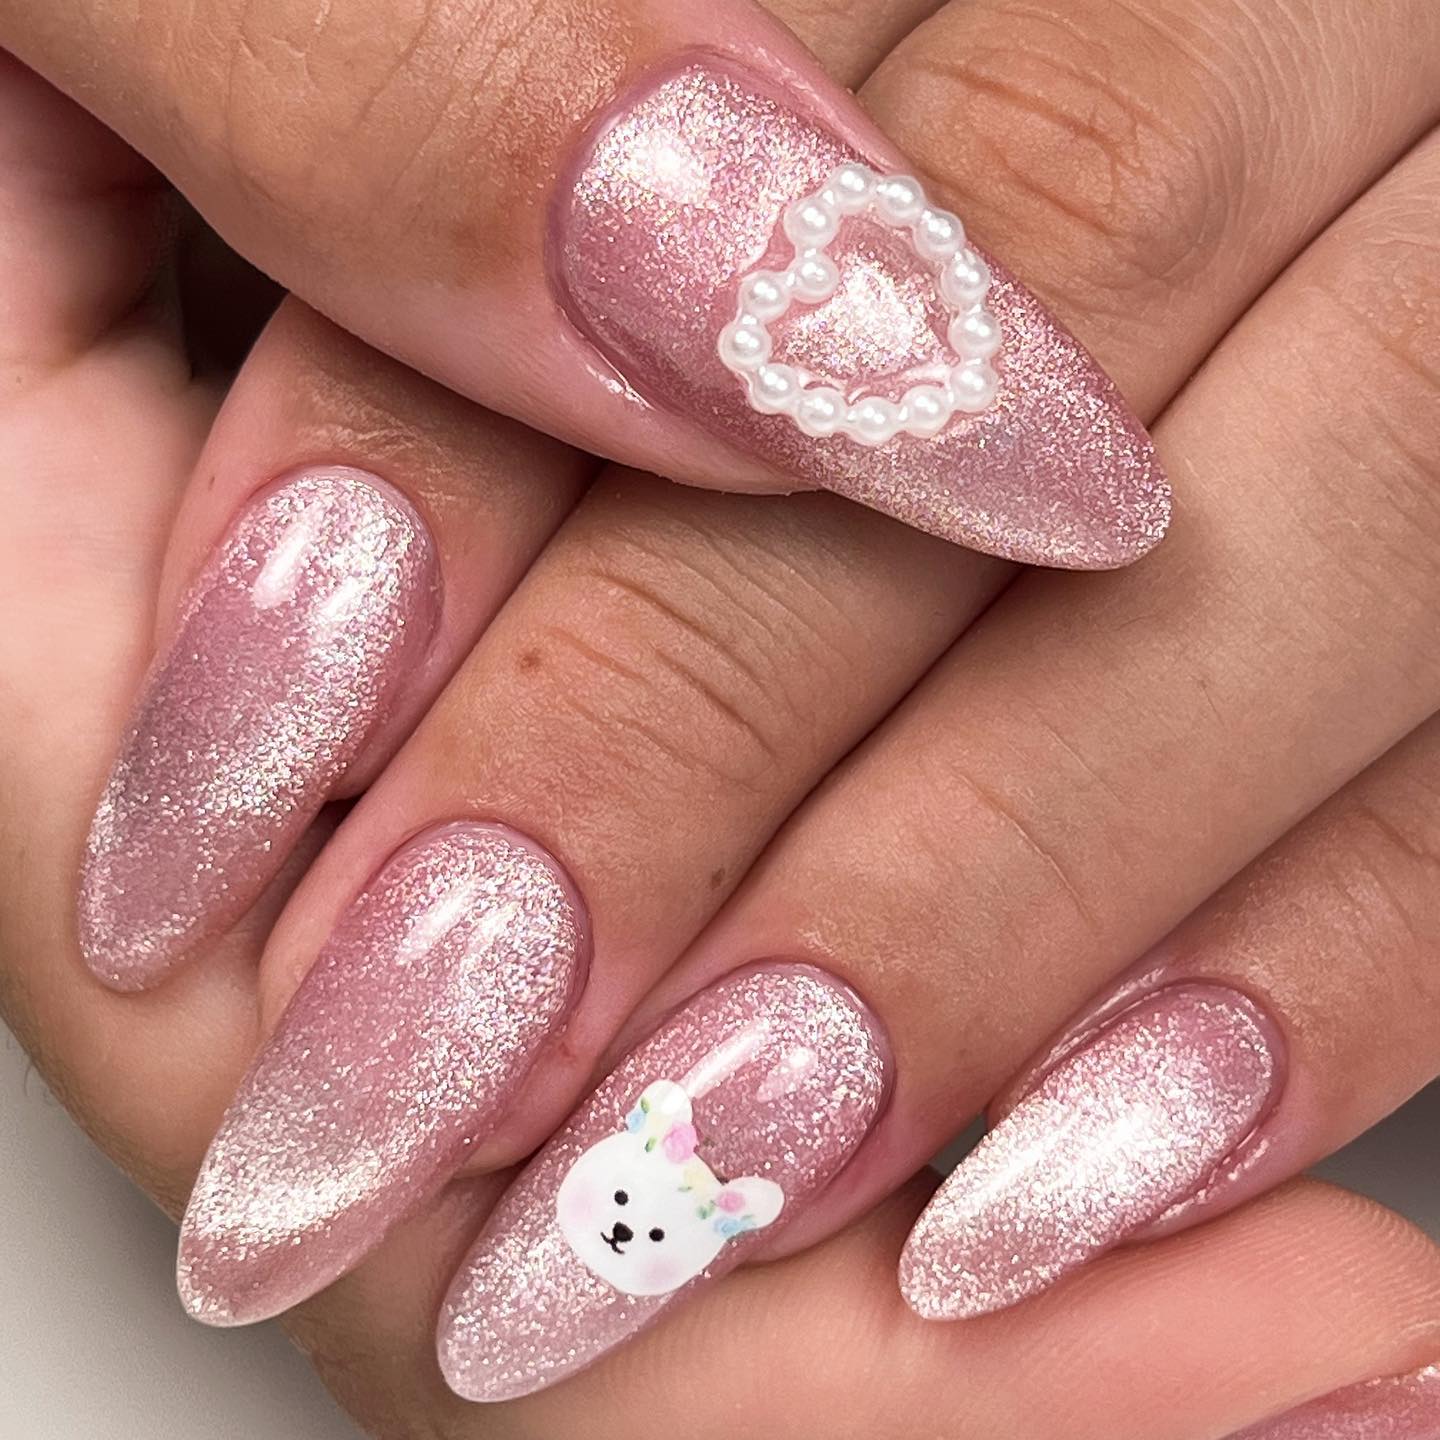 This soft pink cat eye nail art is for those who can't give up applying a pink nail polish. Go for it.